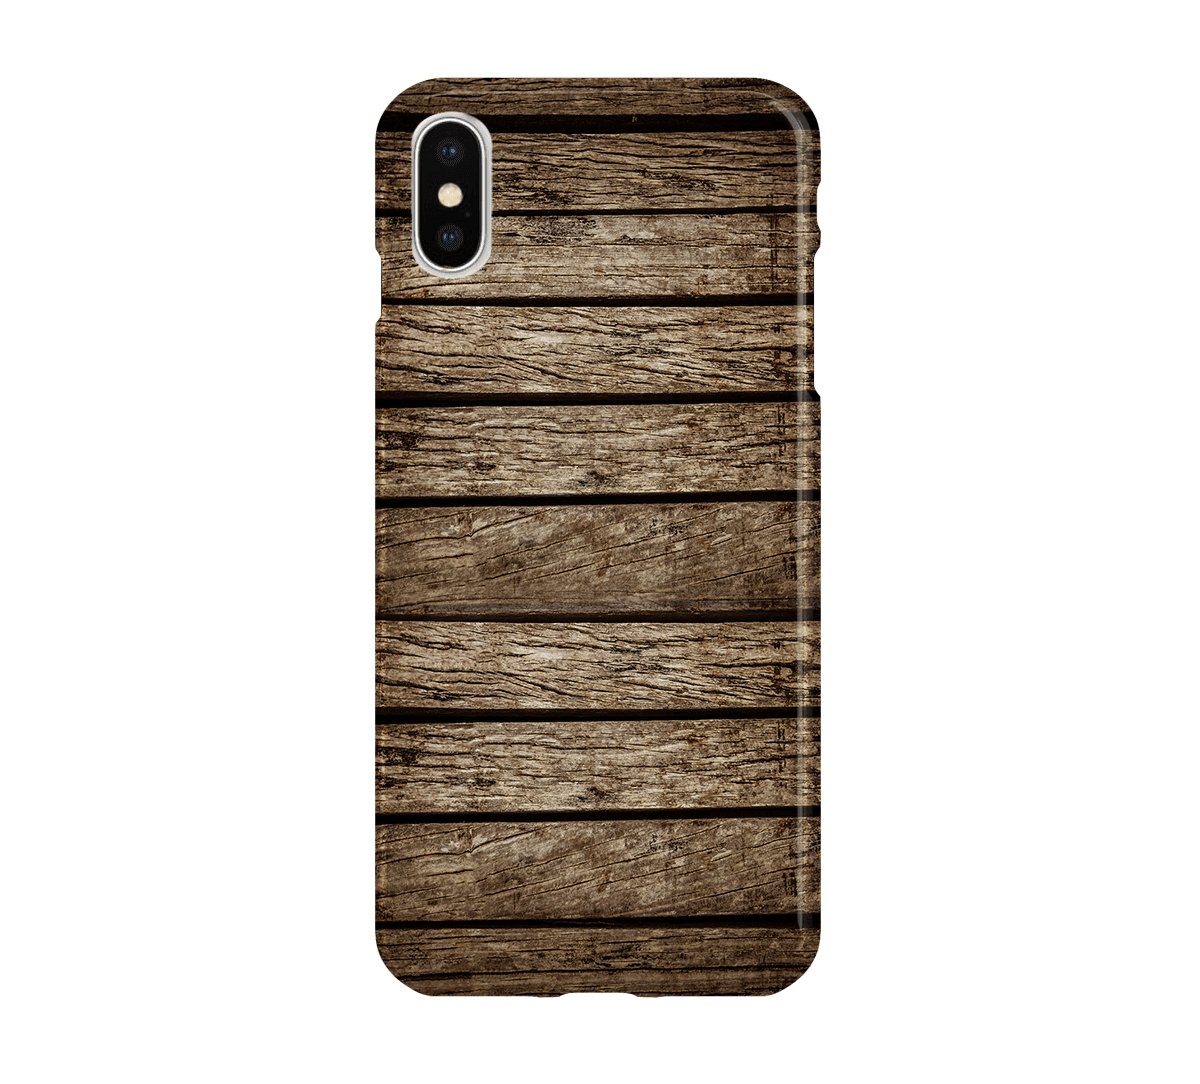 Rustic Cabin - iPhone phone case designs by CaseSwagger